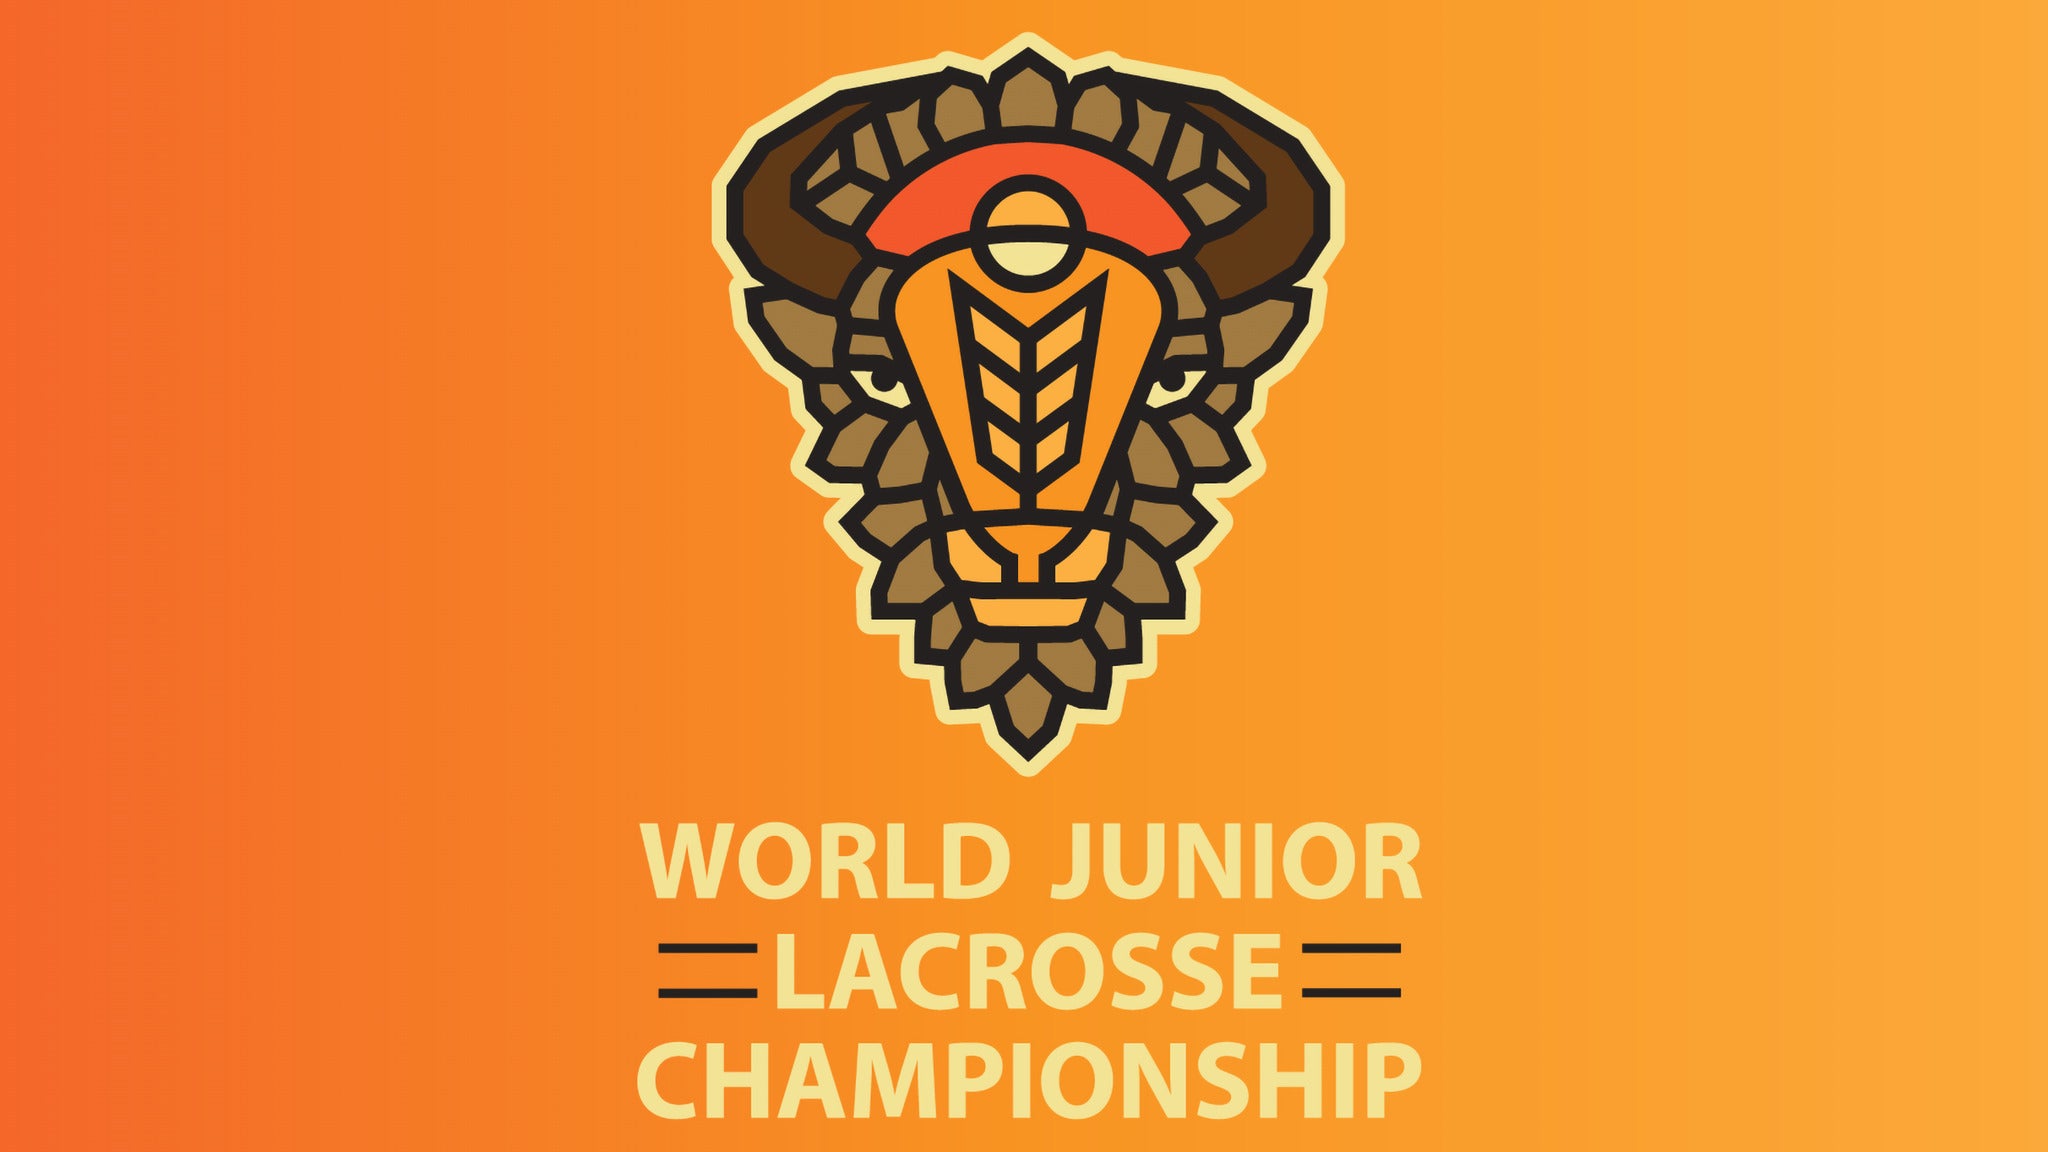 World Junior Lacrosse Championship Full Event Package pre-sale code for real tickets in Saskatoon